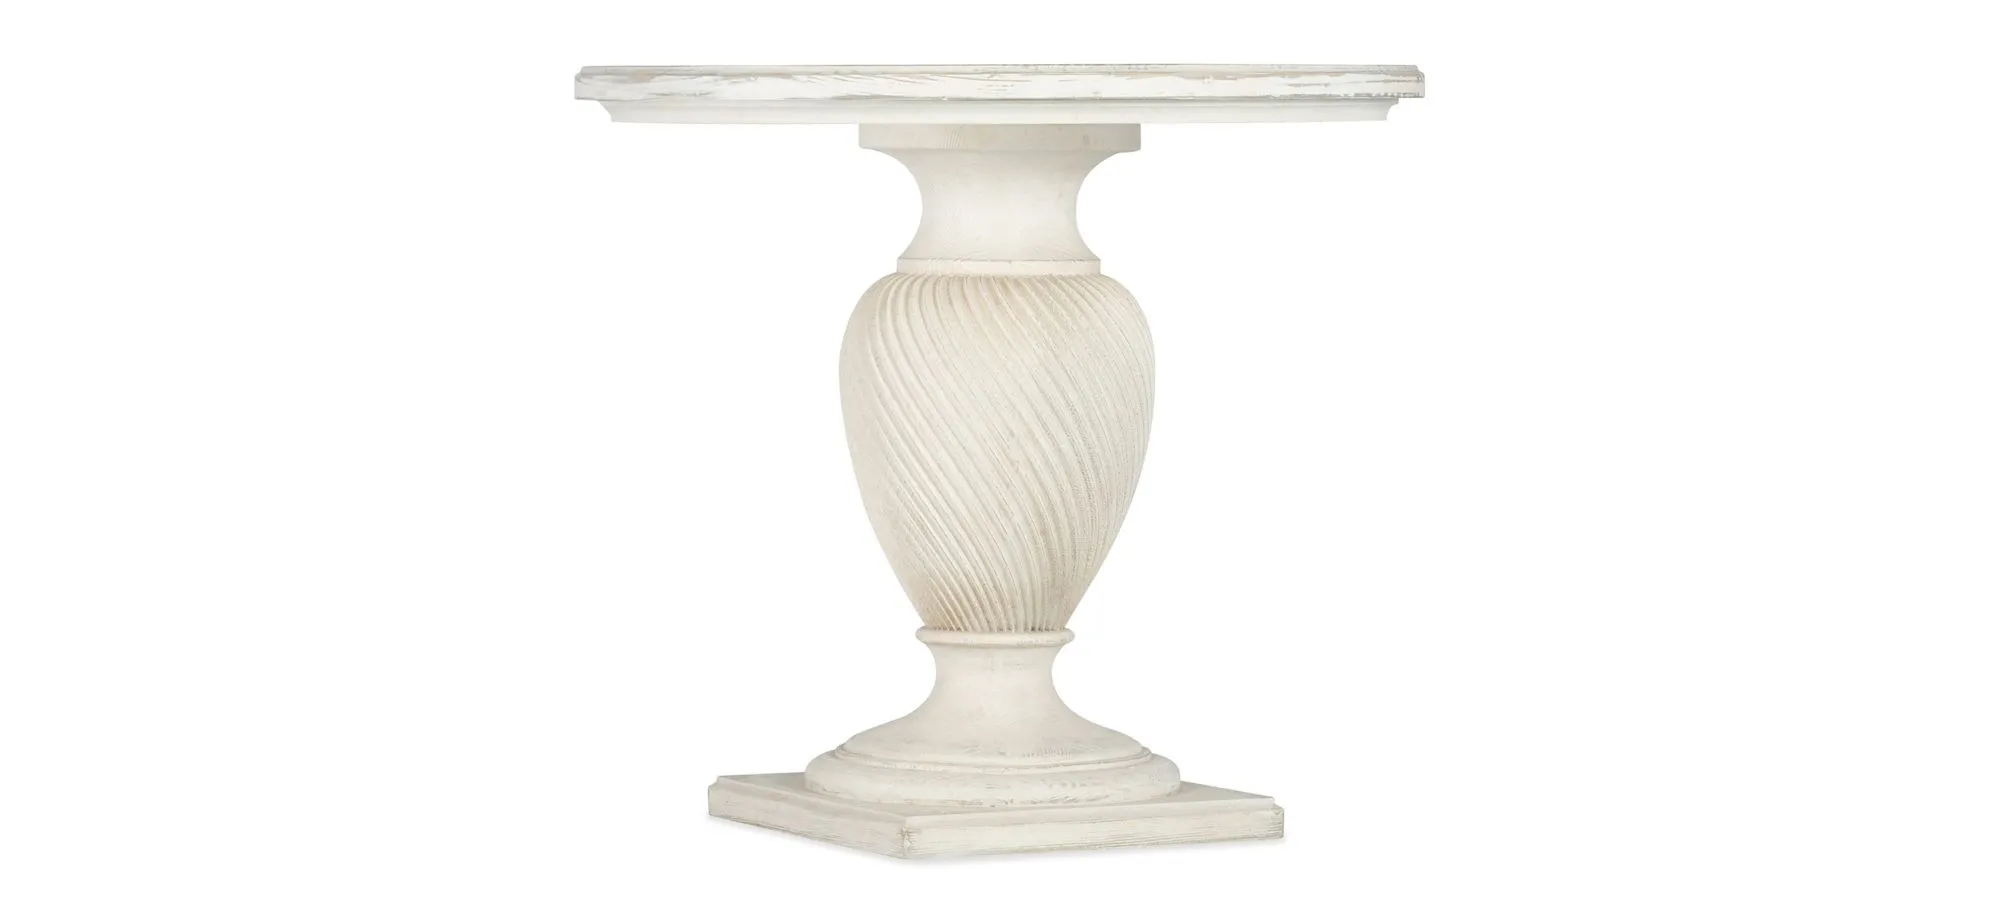 Traditions Round End Table in Magnolia: a soft white finish. Distressing includes rasping, wormholes and sandblasting. by Hooker Furniture